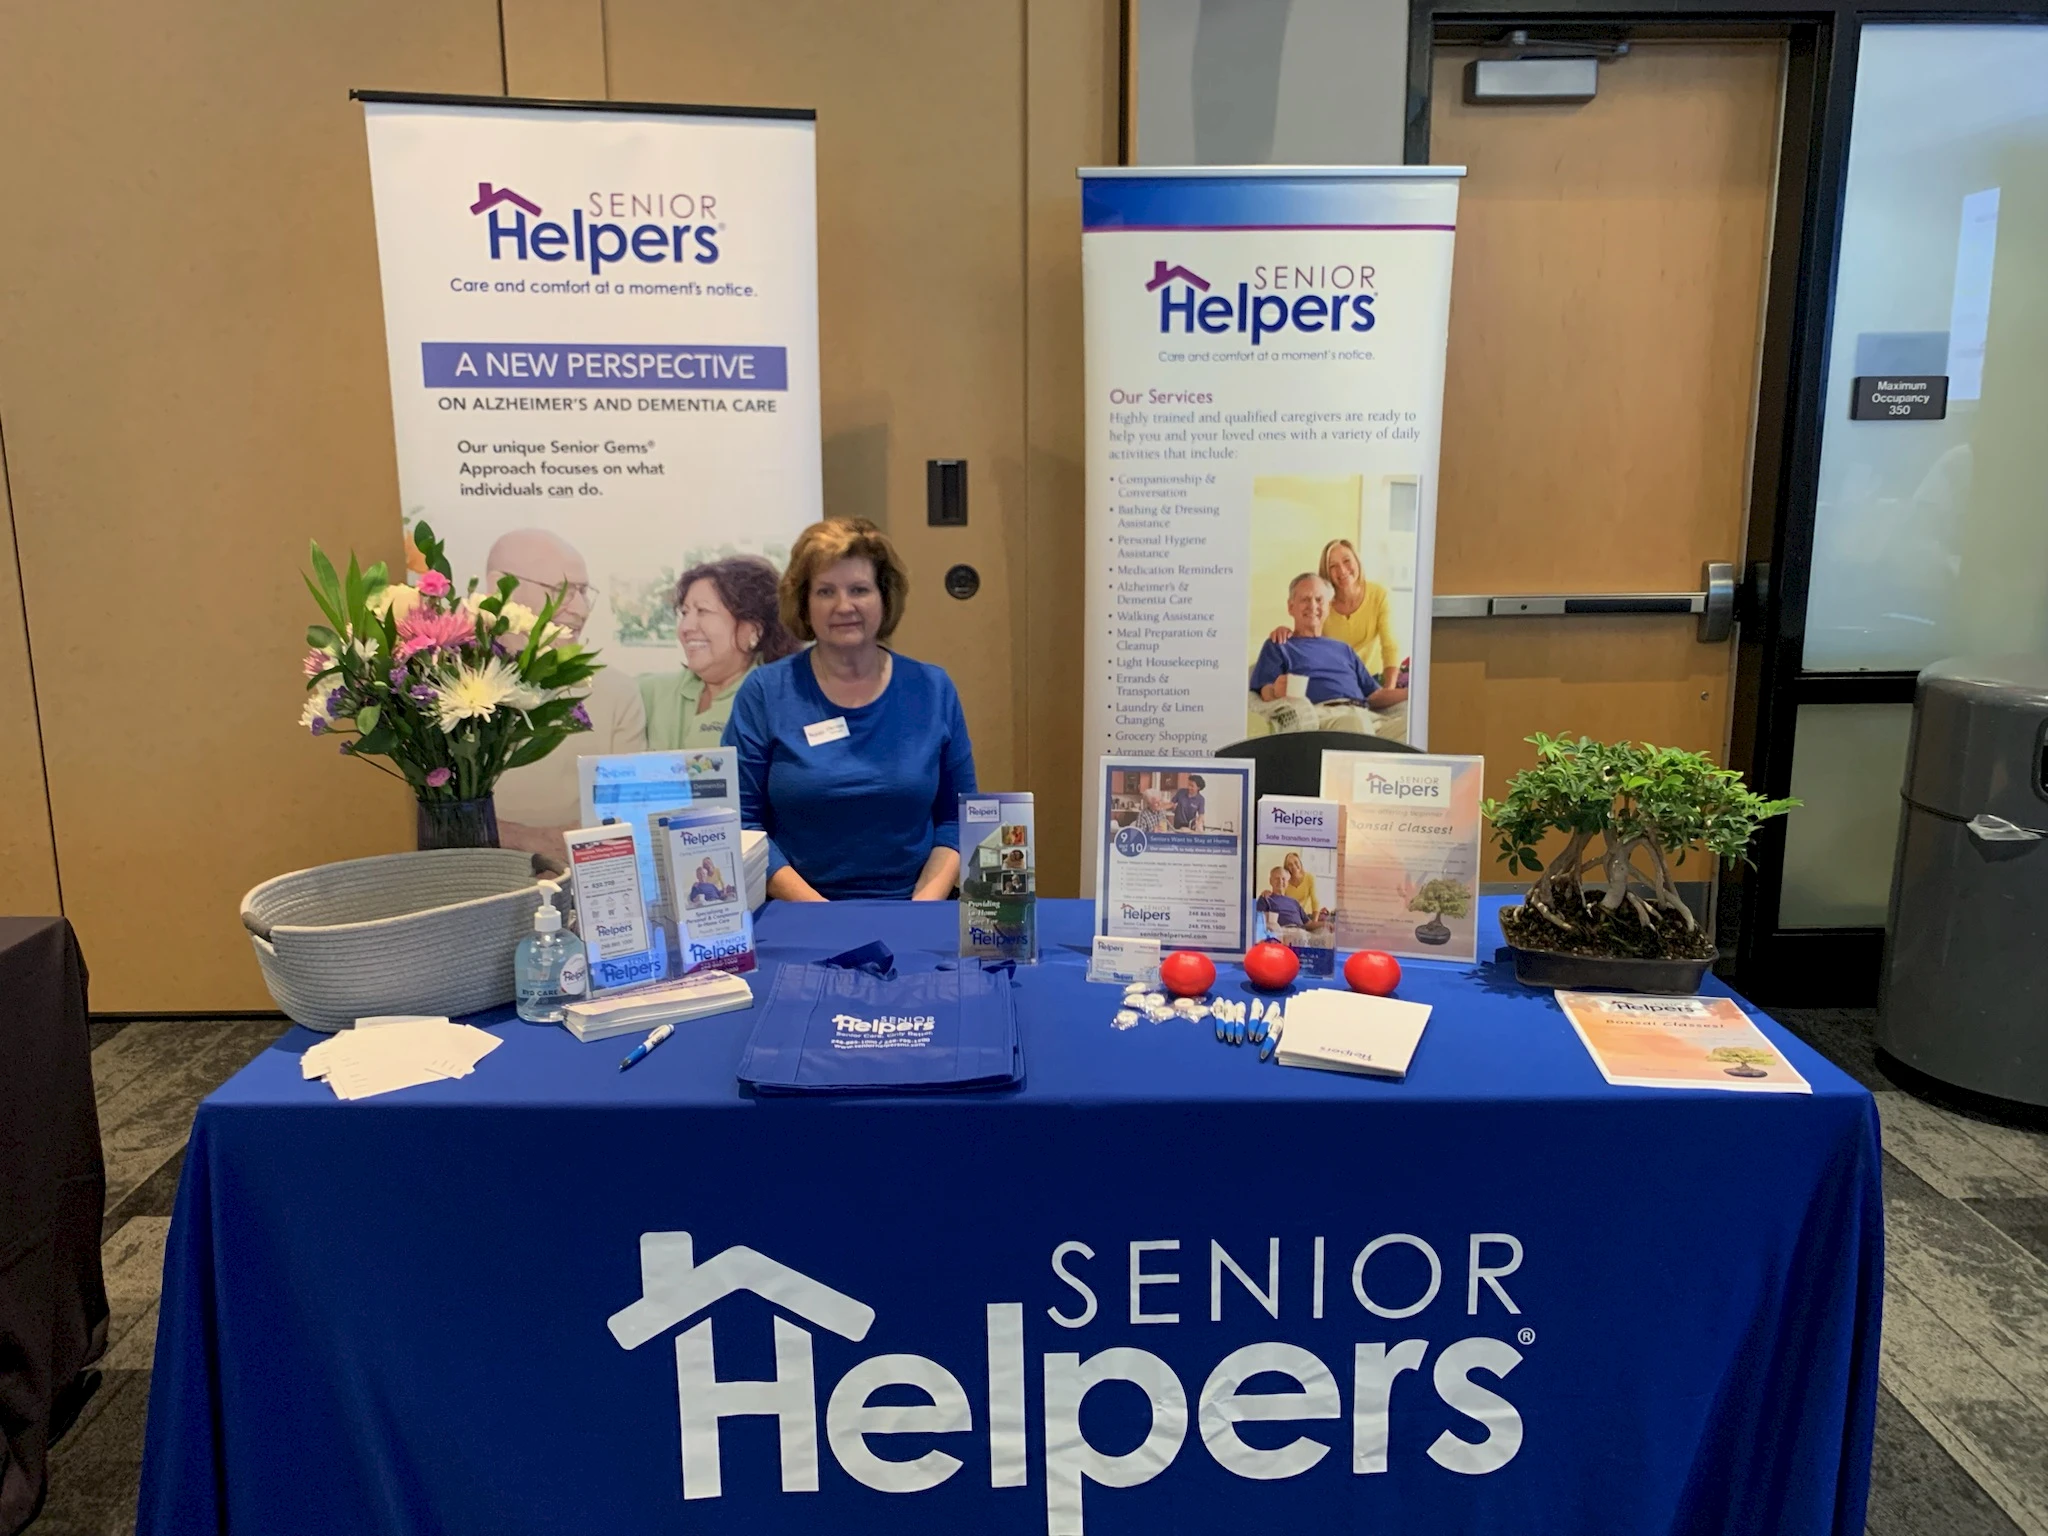 We attended Issues in Aging presented by the Alzheimer’s Association of Michigan. There were four speakers in the aging field who provided valuable information to over 300 attendees!